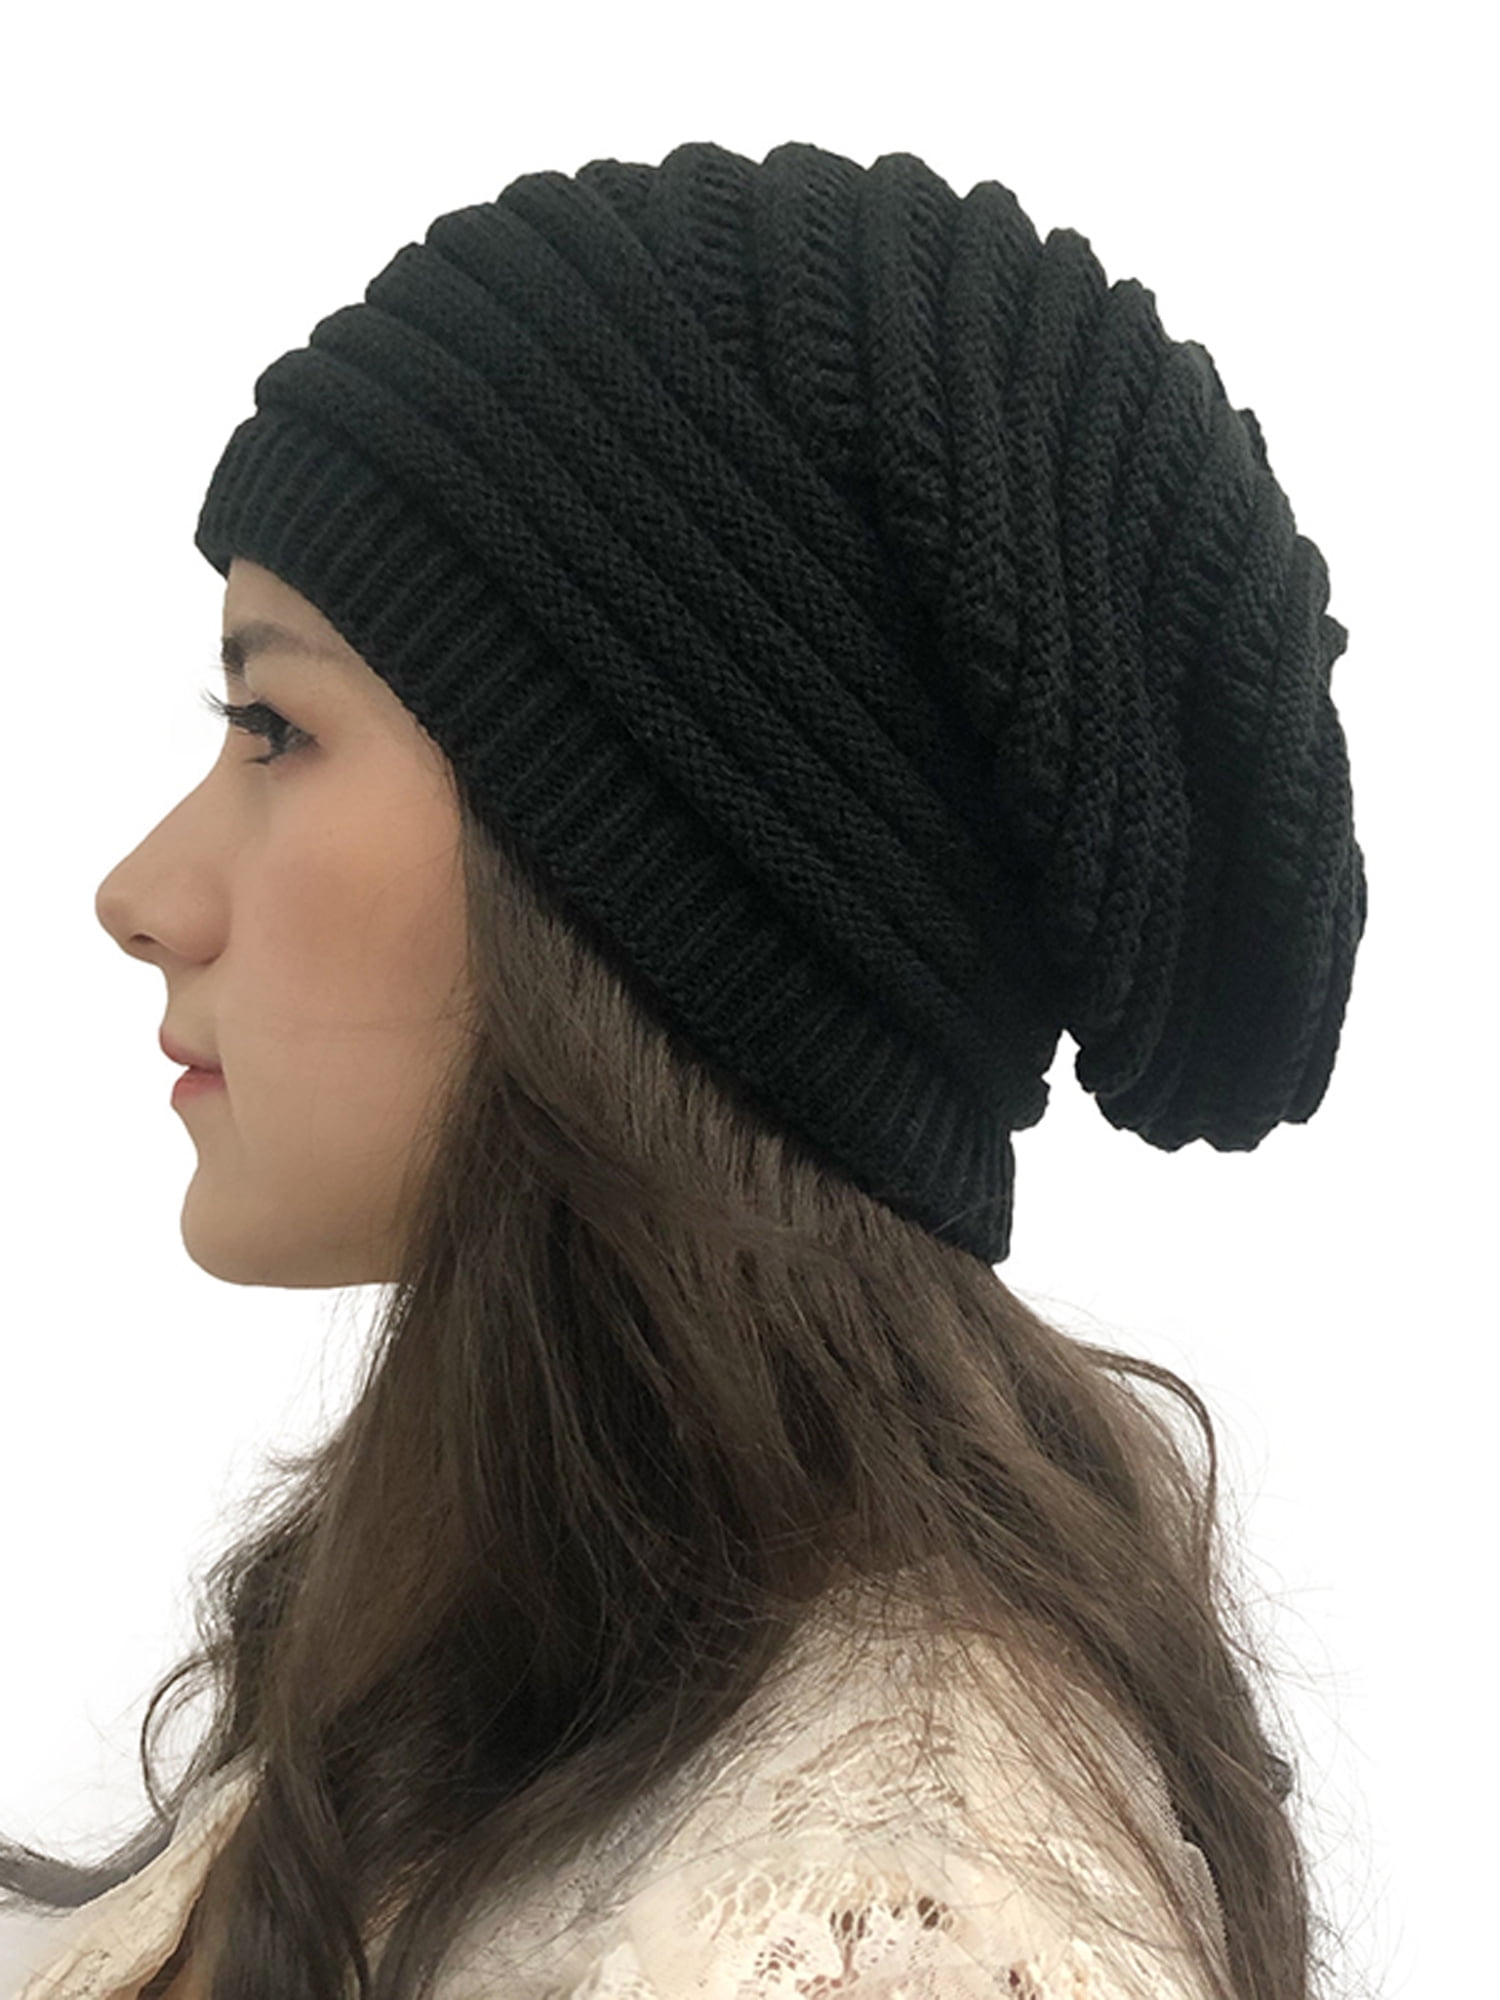 Womens Knitted Slouchy Winter Warm Casual Wool Beret Baggy Beanie Hats Caps Walmart.com